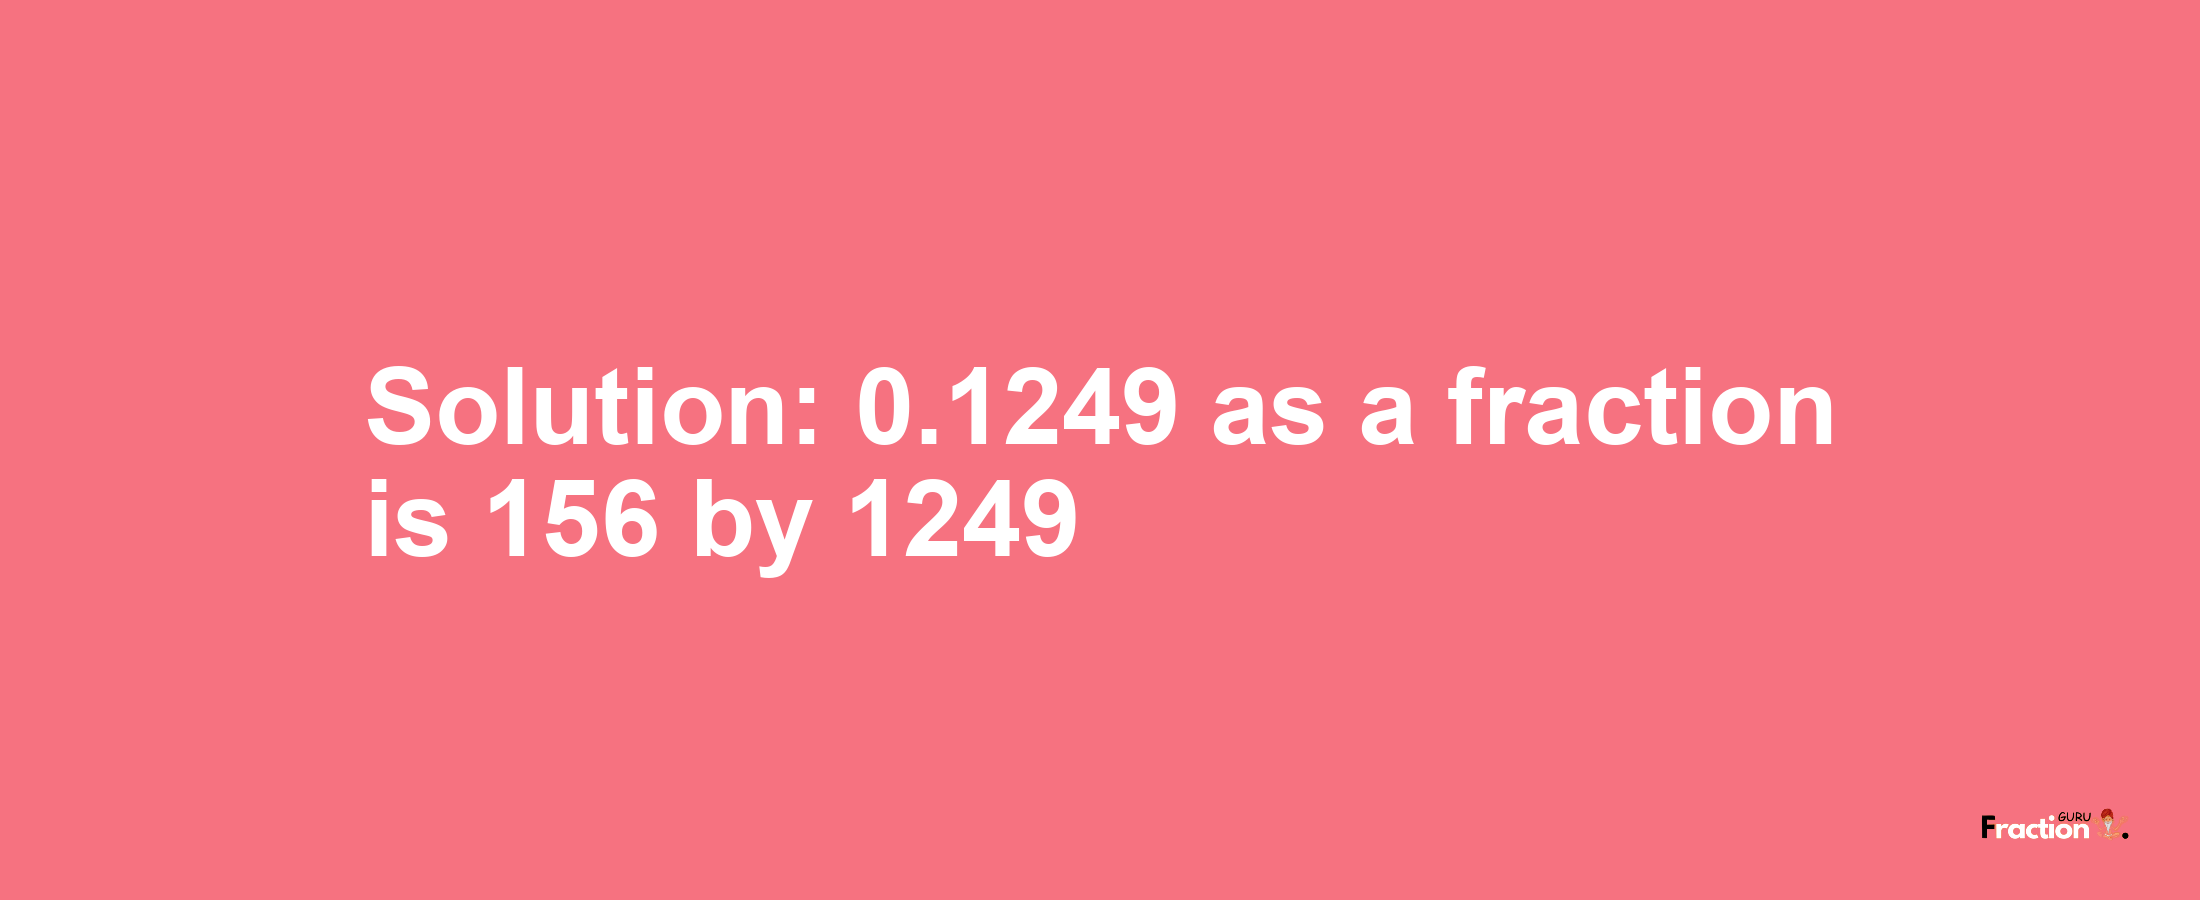 Solution:0.1249 as a fraction is 156/1249